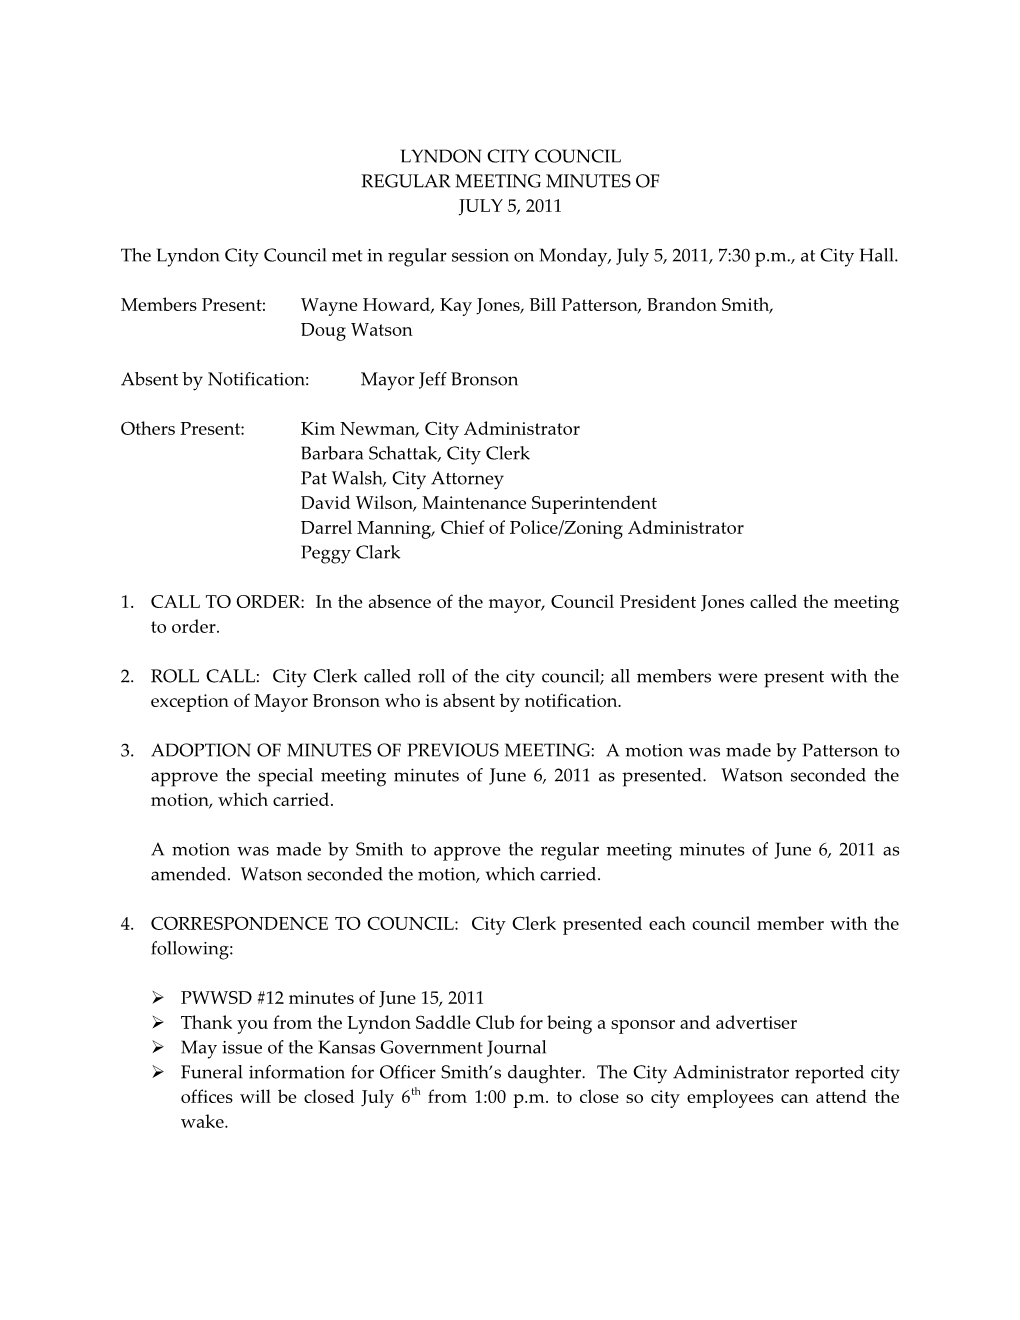 Regular Council Minutes of July 5, 2011